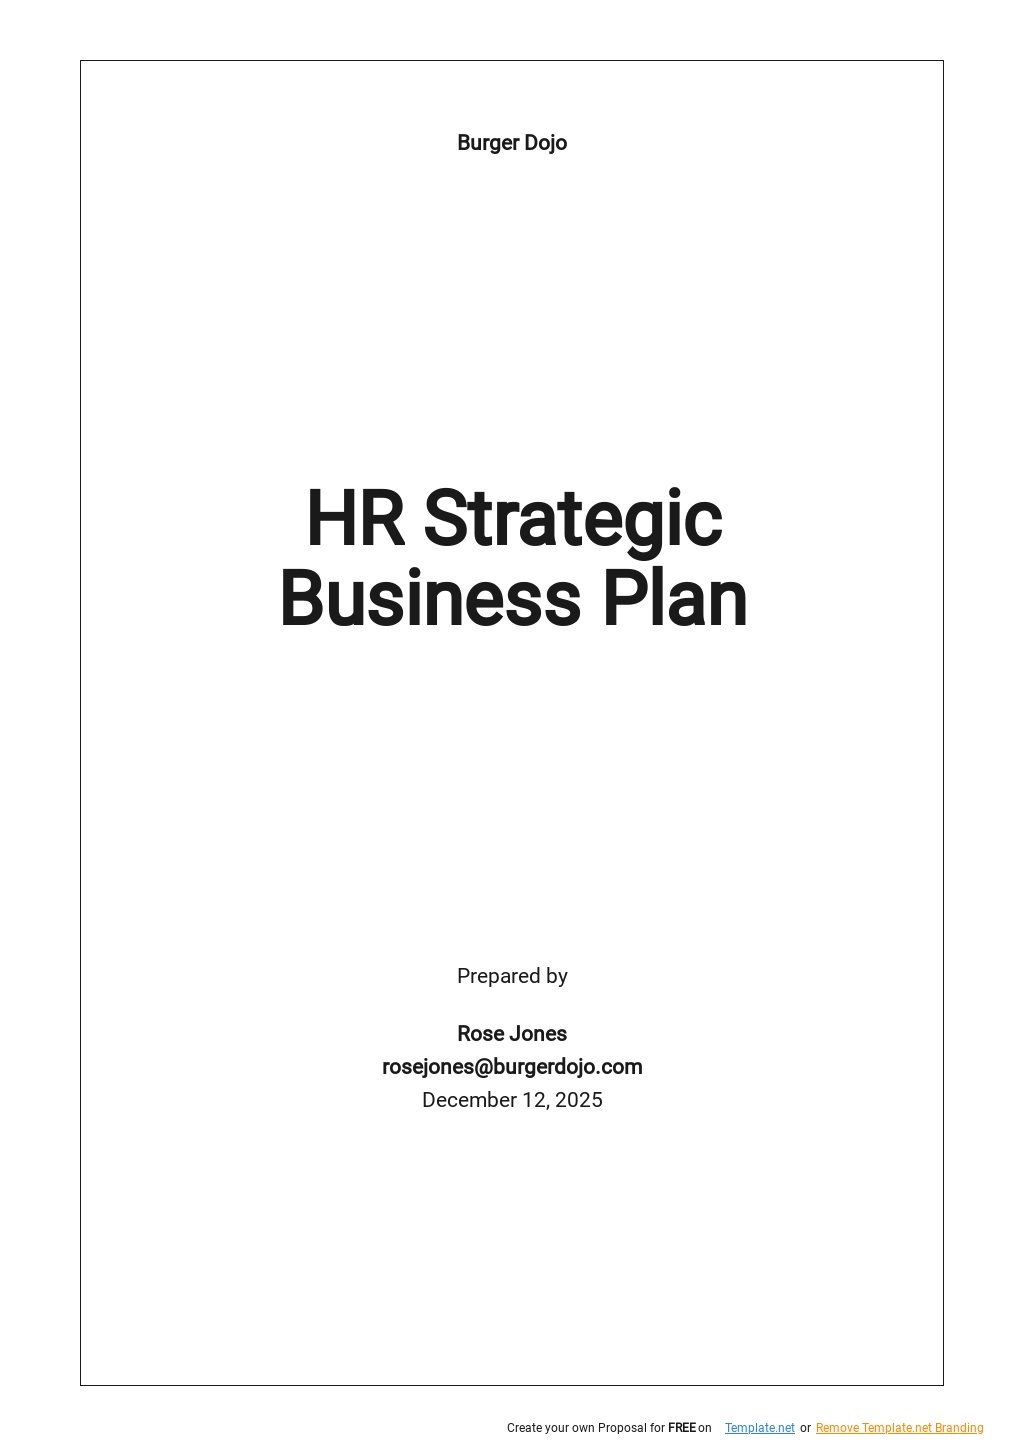 HR Strategic Business Plan Template Google Docs, Word, Apple Pages